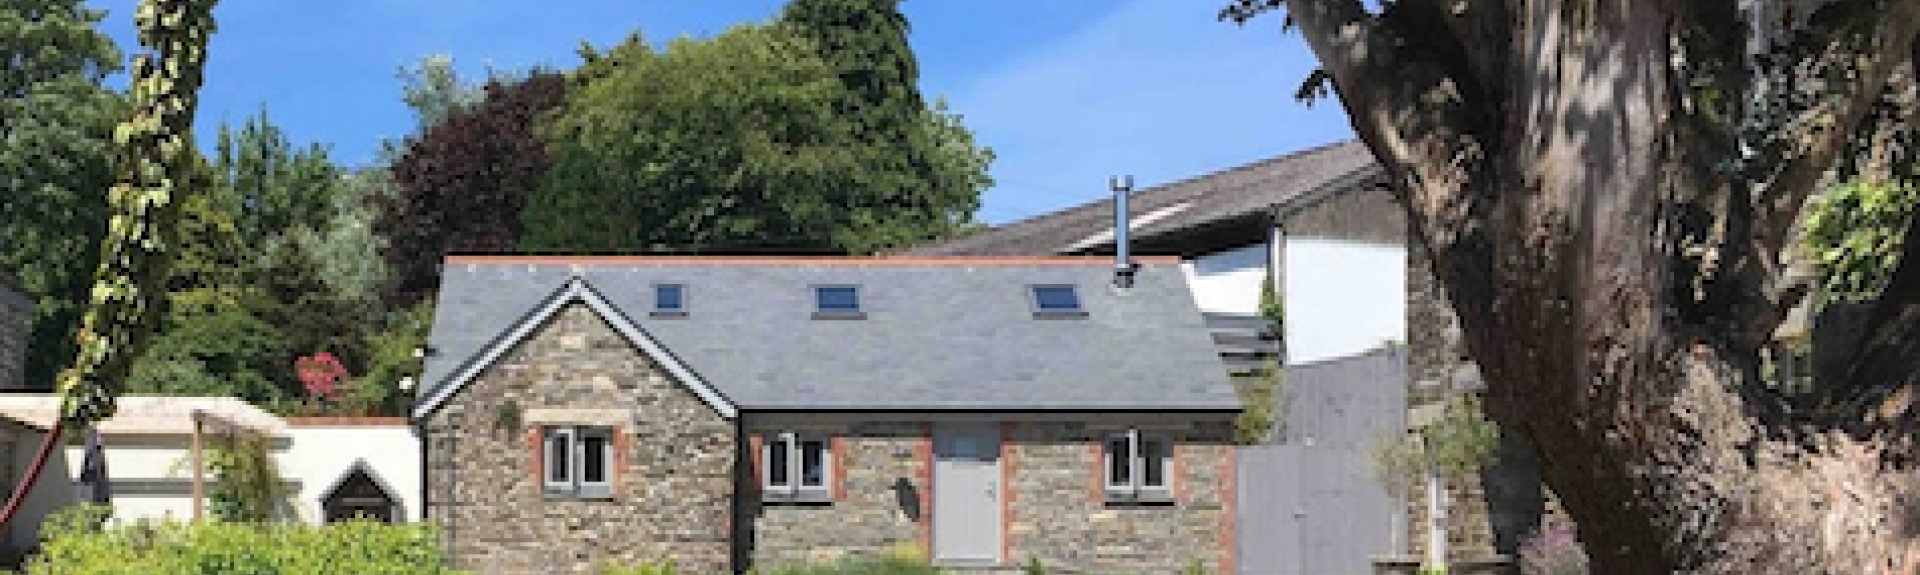 Between shrubs and a mature tree, stands a Cornish 2-storey stone-barn conversion